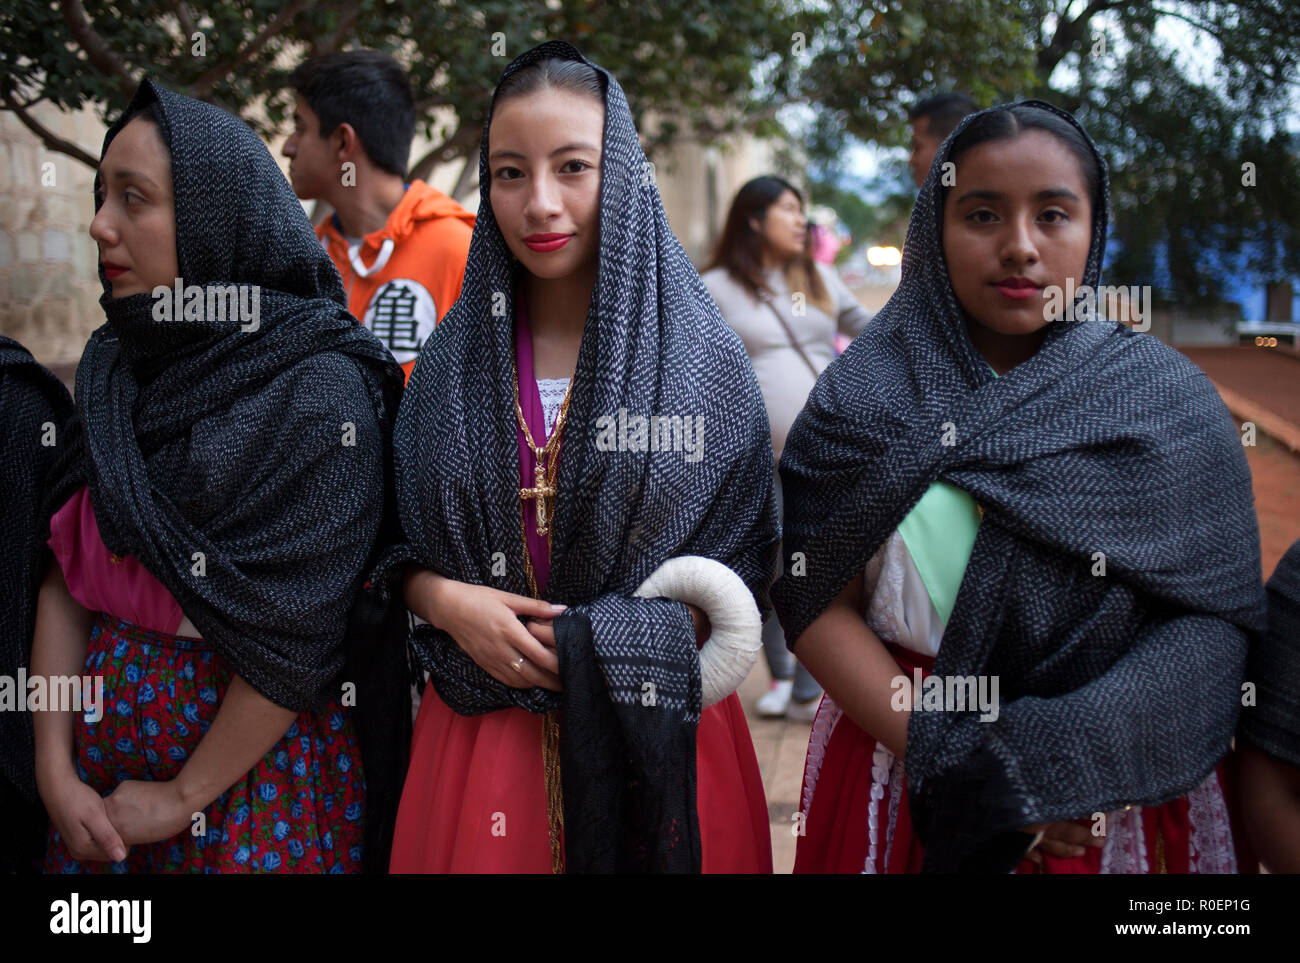 Young women dressed with traditional clothing during a religious celebration outside the Templo de Santo Domingo church in Oaxaca, Mexico Stock Photo